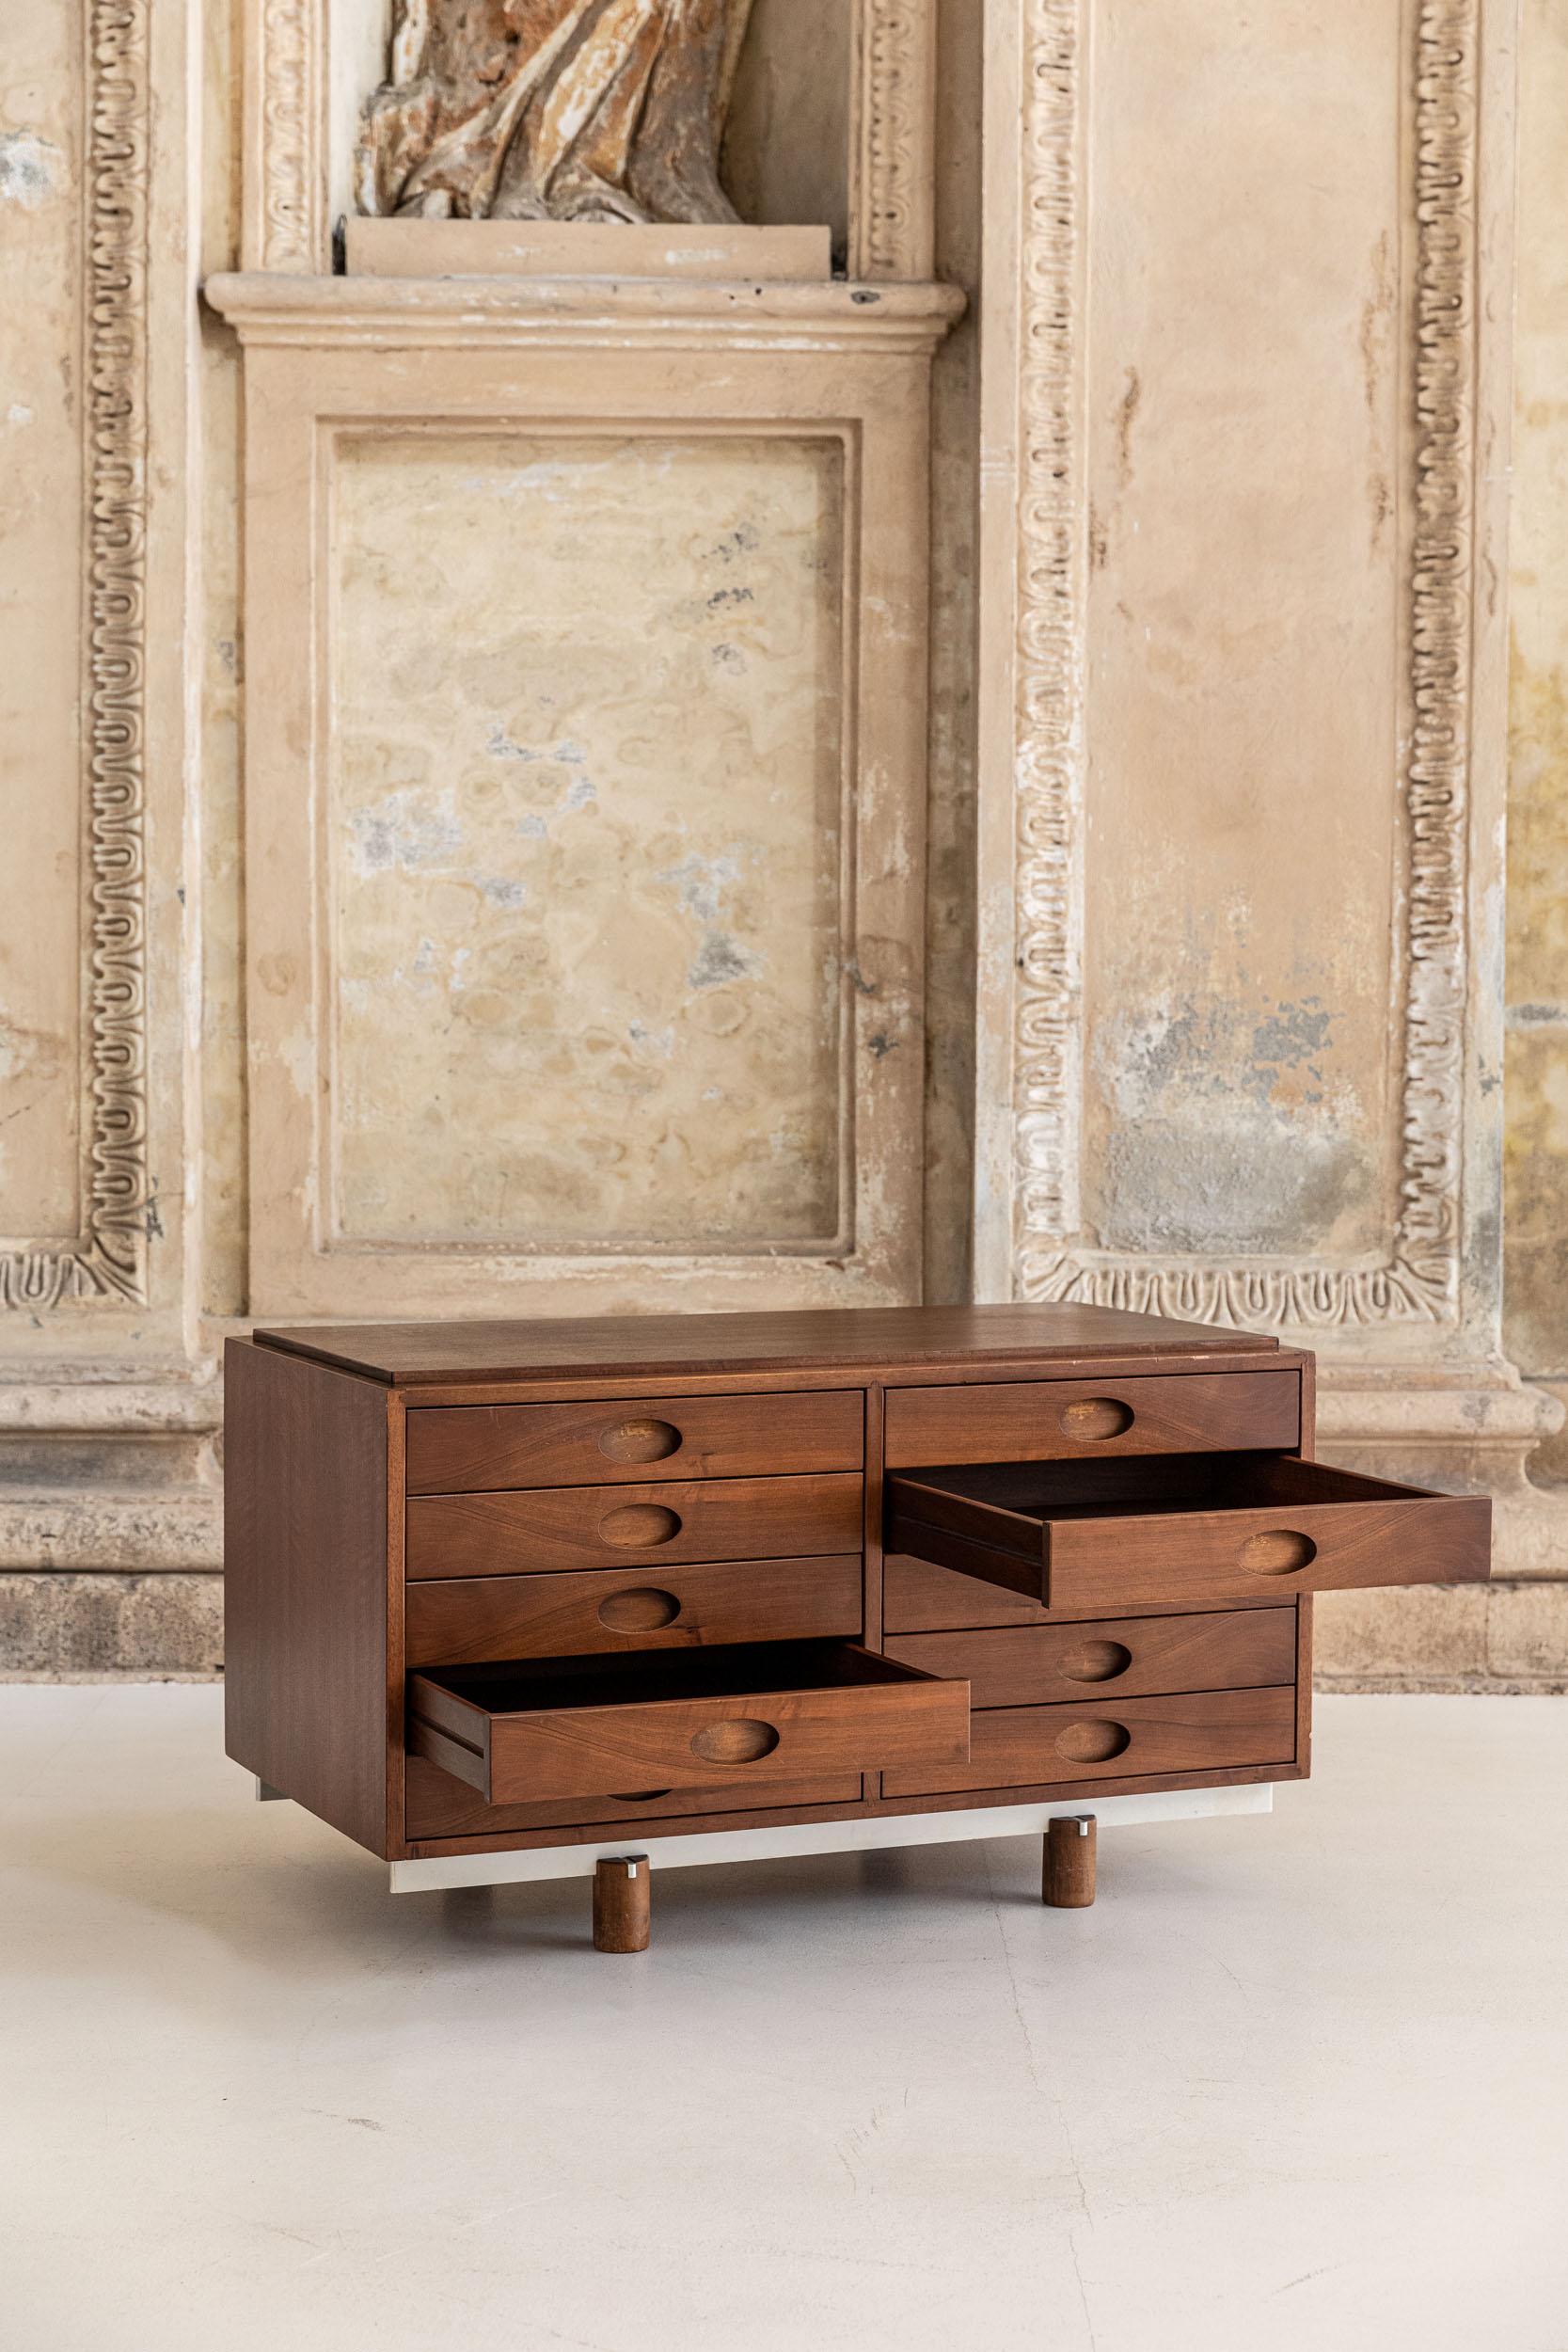 Mid-20th Century Italian midcentury cest of drawers by Gianfranco Frattini 